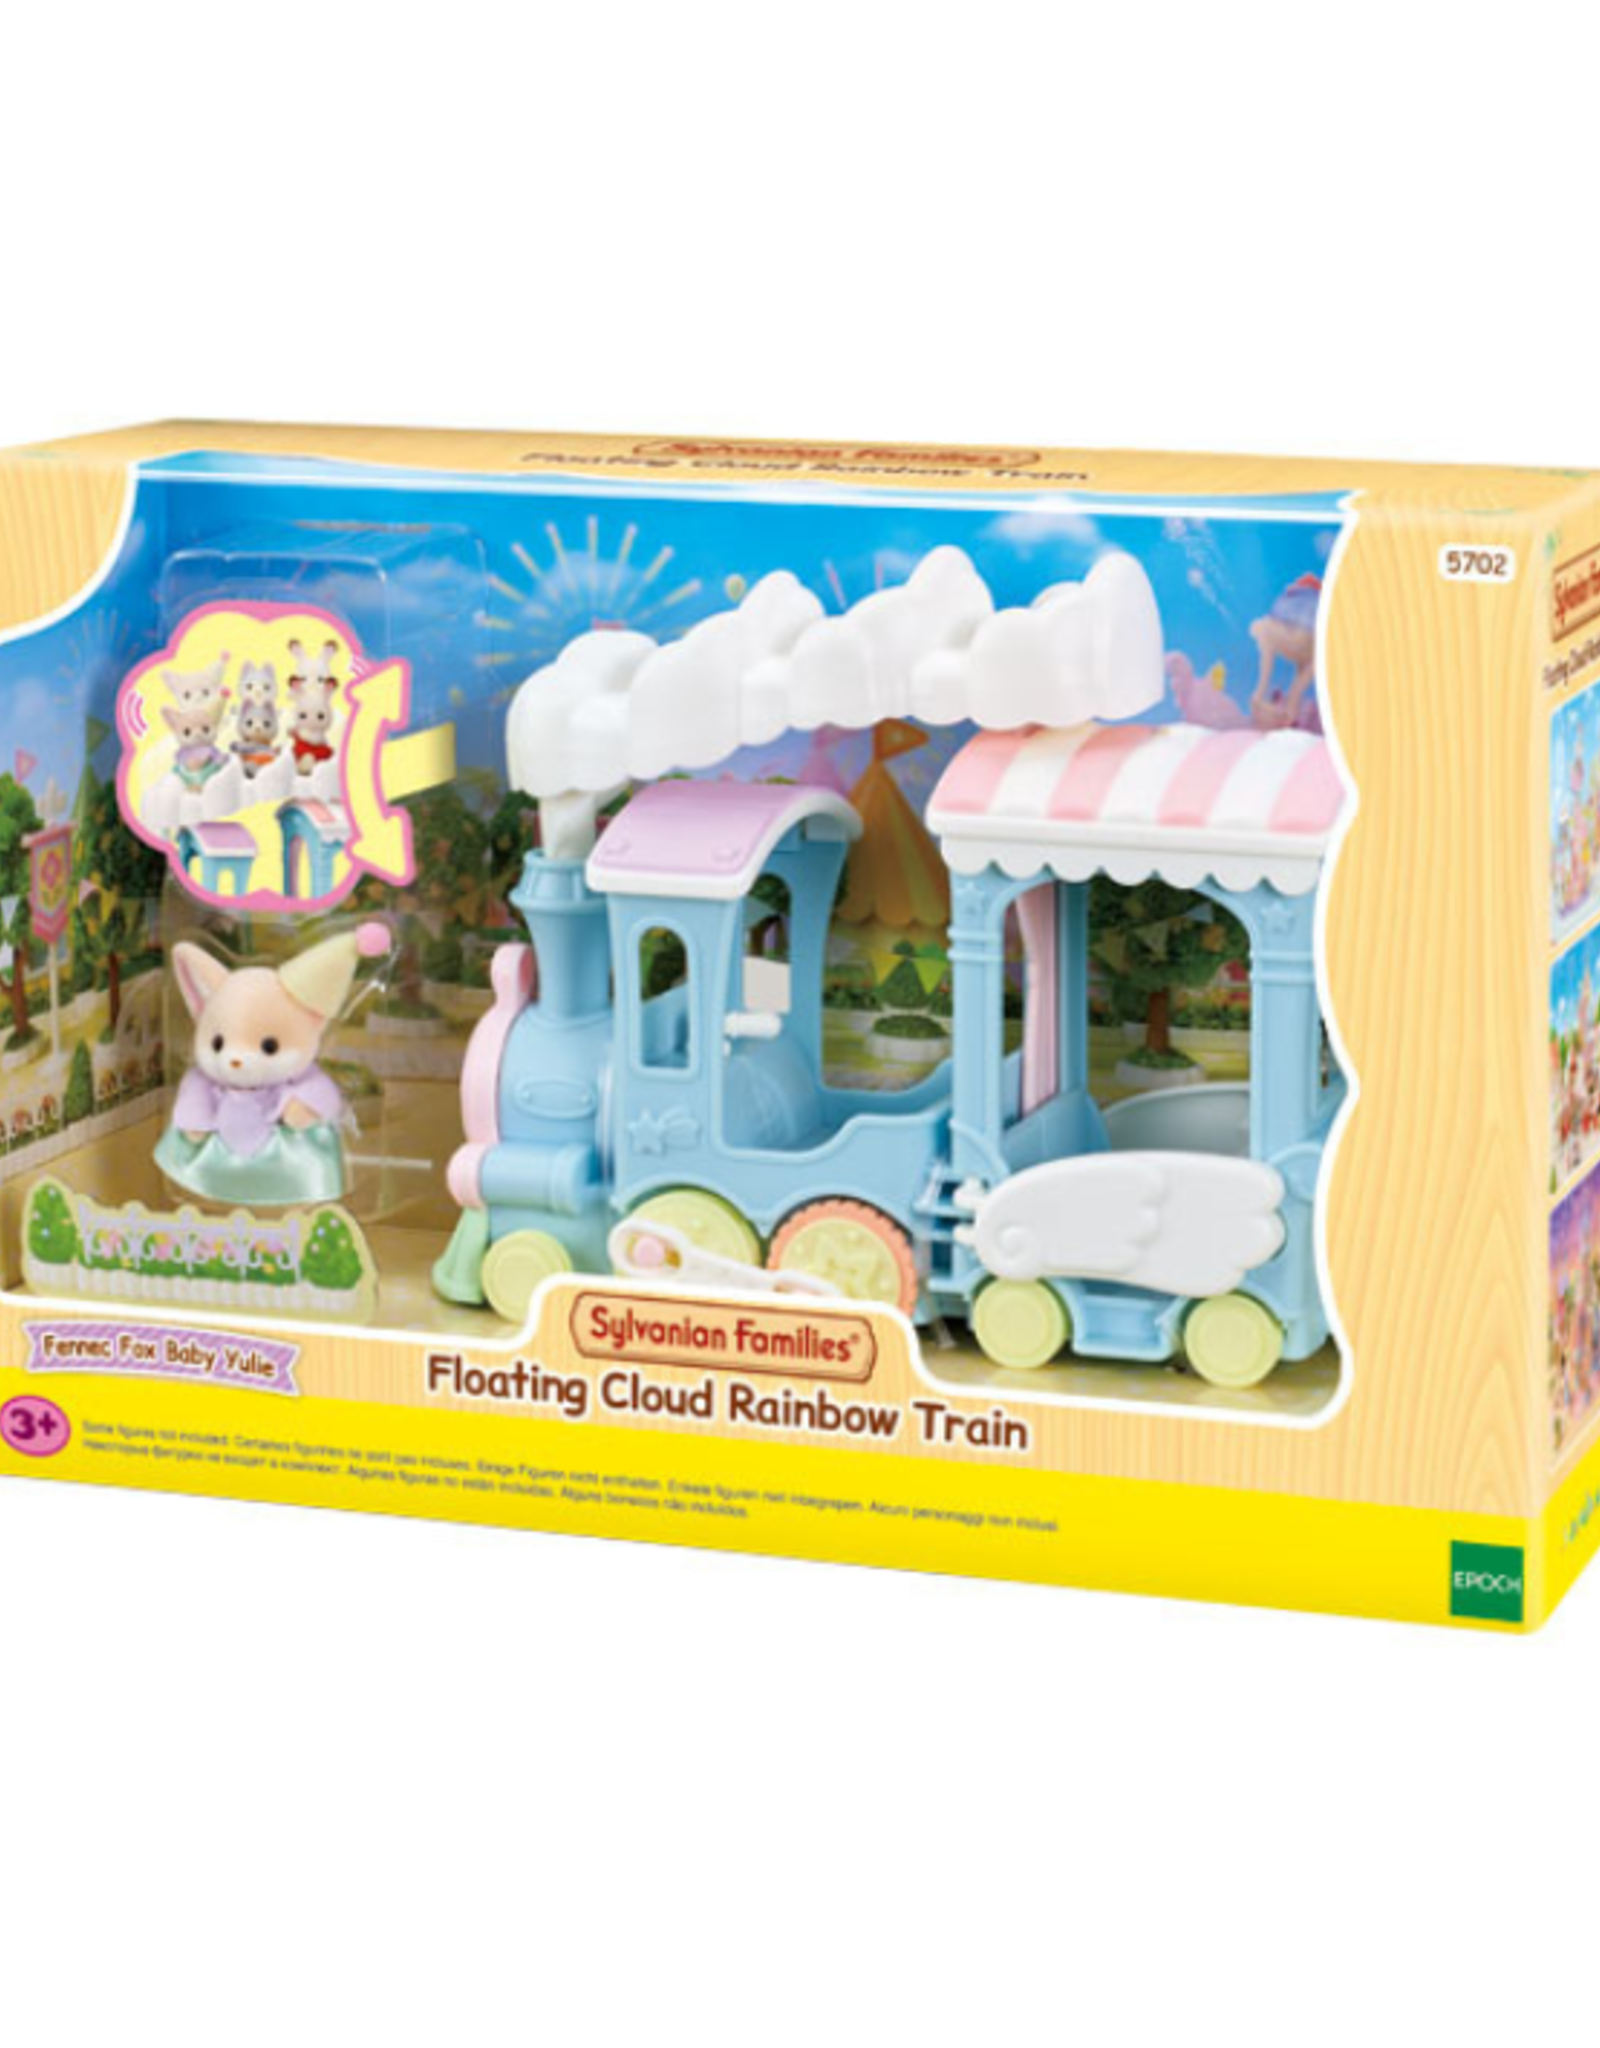 Calico Critters Calico Critters - Floating Cloud Rainbow Train